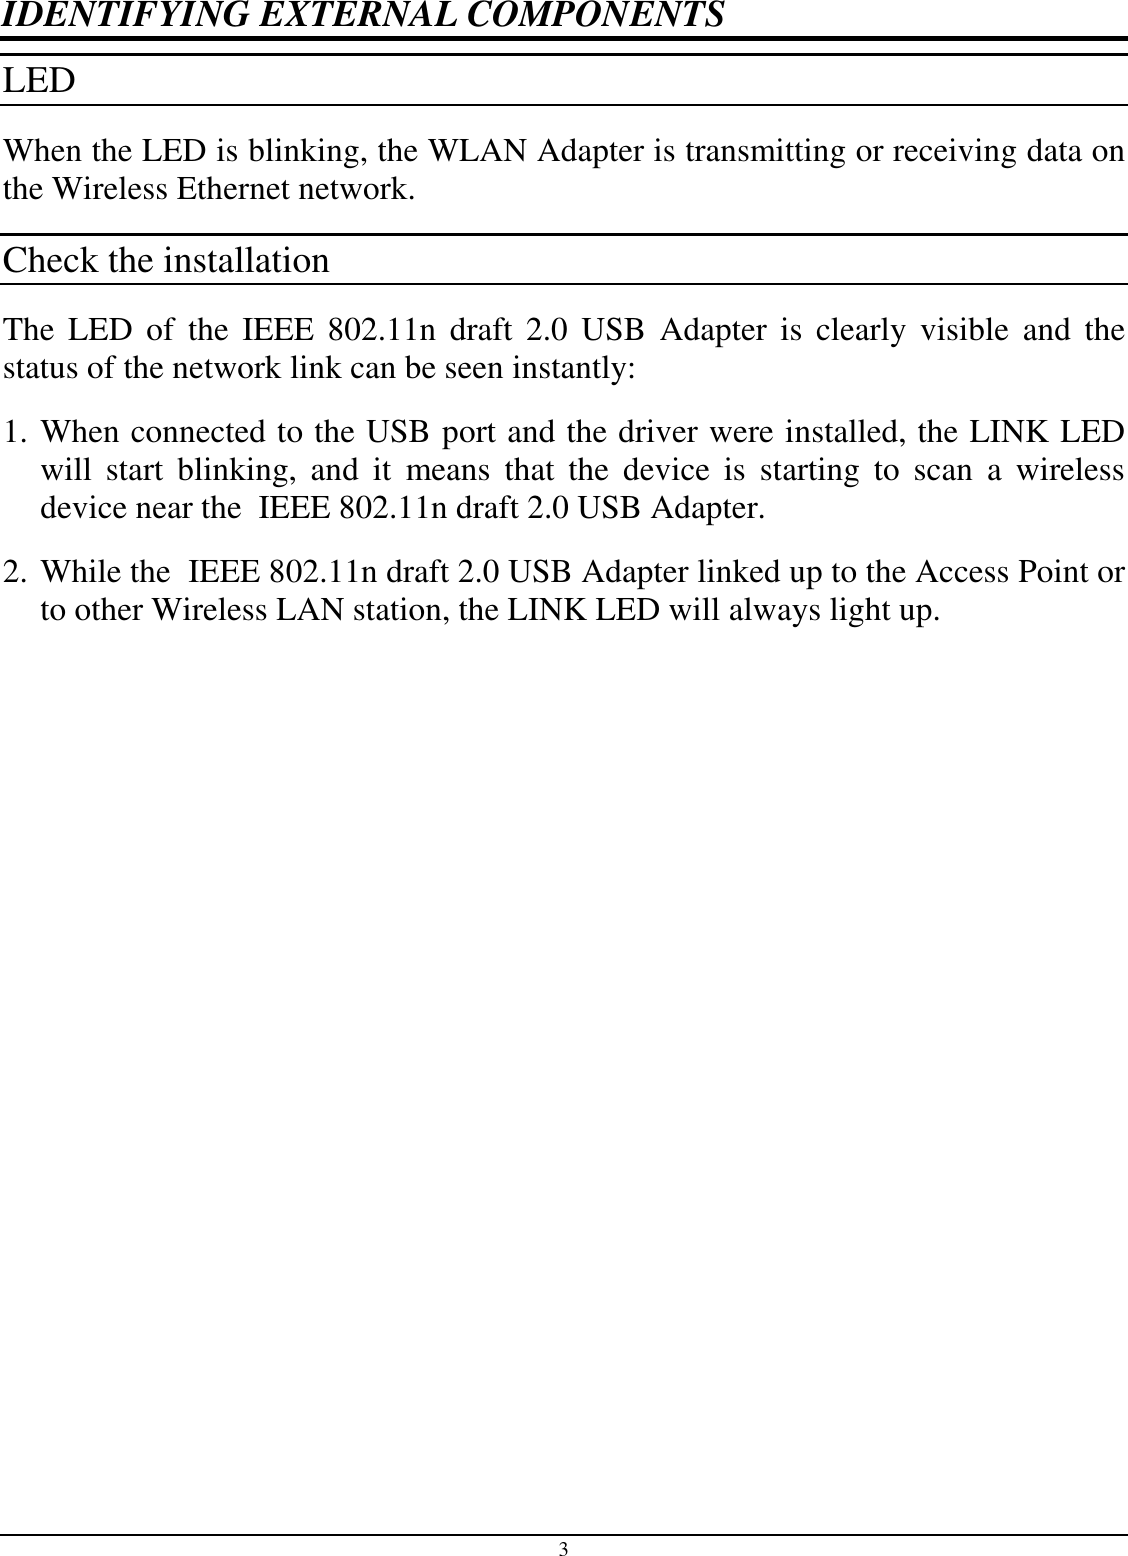 3 IDENTIFYING EXTERNAL COMPONENTS LED  When the LED is blinking, the WLAN Adapter is transmitting or receiving data on the Wireless Ethernet network. Check the installation The  LED  of  the  IEEE 802.11n  draft  2.0  USB  Adapter  is  clearly  visible and the status of the network link can be seen instantly: 1. When connected to the USB port and the driver were installed, the LINK LED will  start  blinking,  and  it  means  that  the  device  is  starting  to  scan  a  wireless device near the  IEEE 802.11n draft 2.0 USB Adapter. 2. While the  IEEE 802.11n draft 2.0 USB Adapter linked up to the Access Point or to other Wireless LAN station, the LINK LED will always light up.  